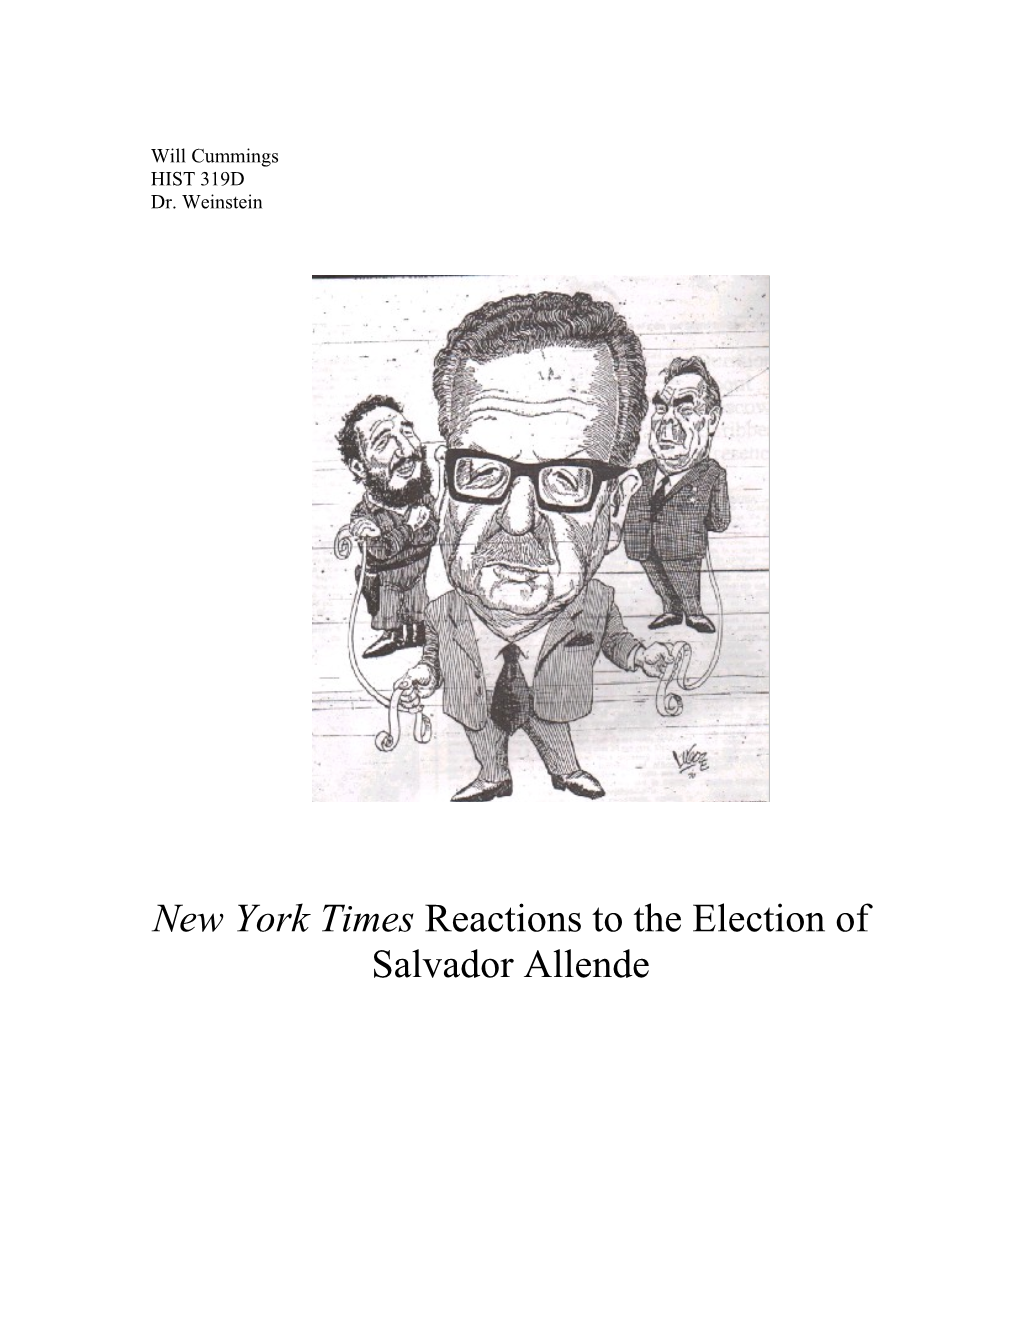 New York Times Reactions to the Election of Salvador Allende